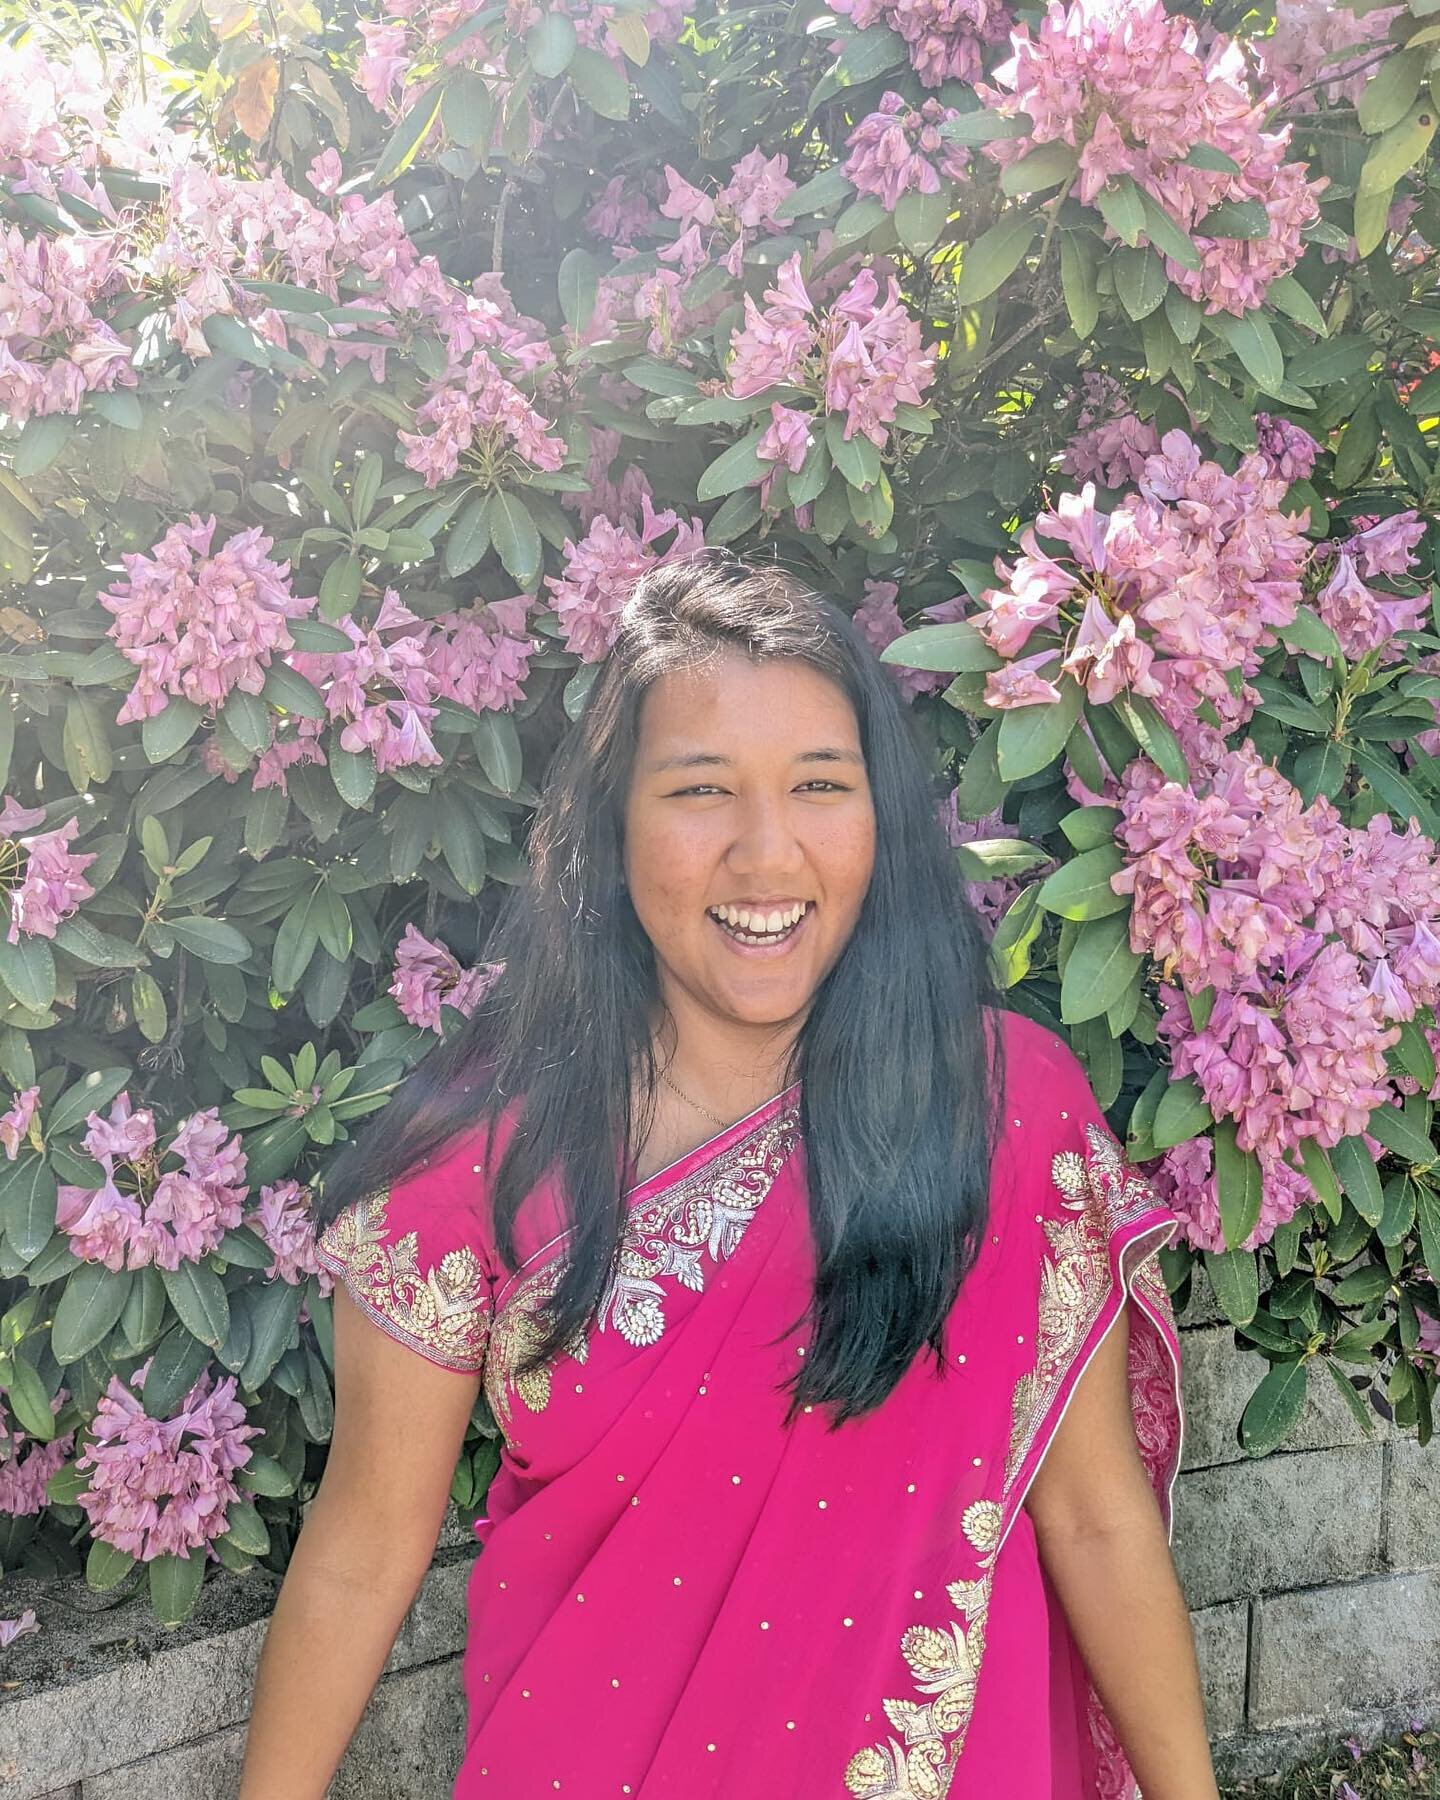 So august 2020, Duncan and I opened our home to this young Indian woman whom we did not know.  The funny part?&hellip; we didn&rsquo;t ask our high school/college kids.  There was the initial awkwardness, but this young woman came into our home with 